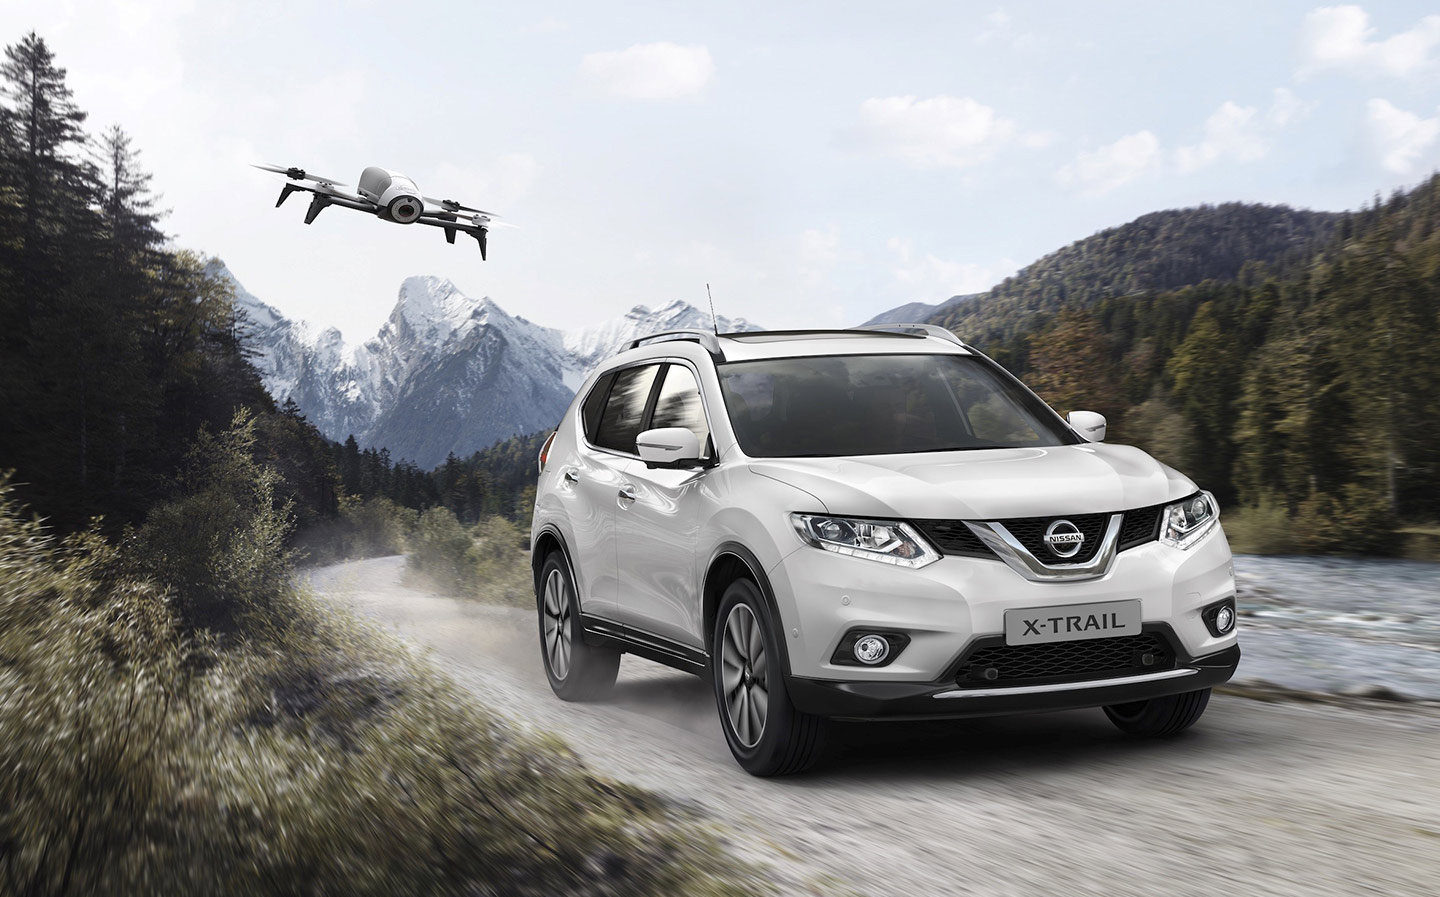 You can now buy a Nissan X-Trail with its own drone